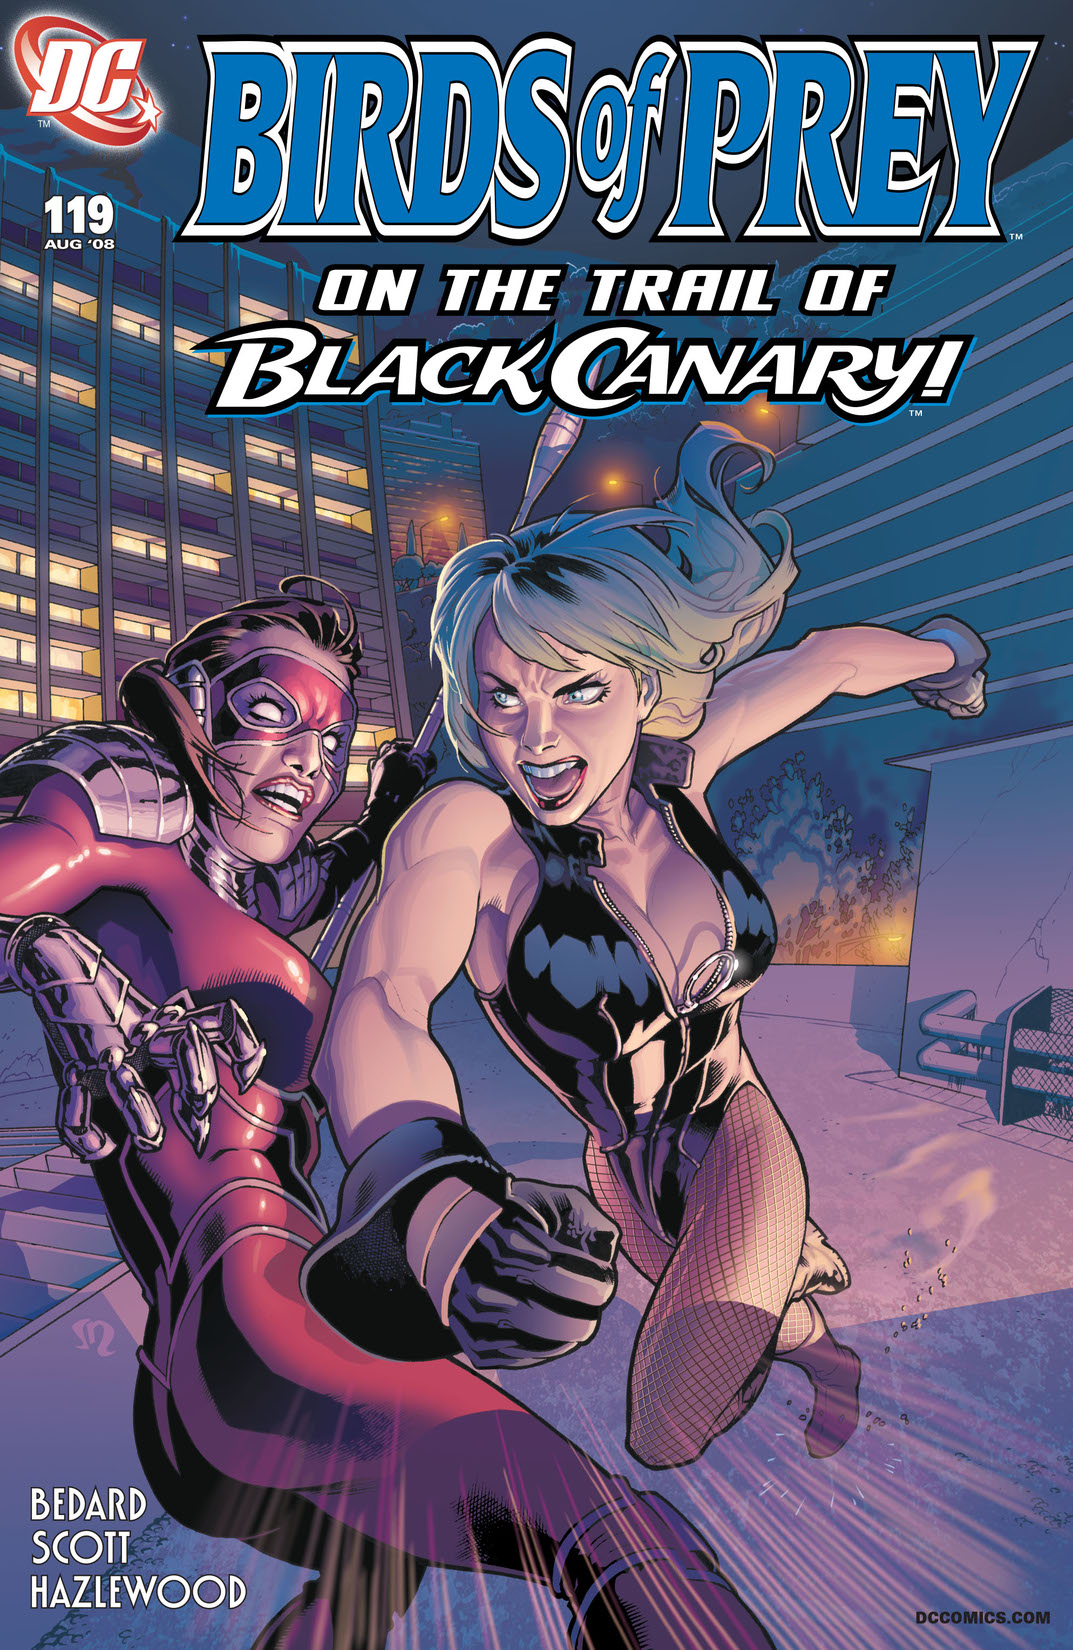 Birds of Prey (1998-) #119 preview images